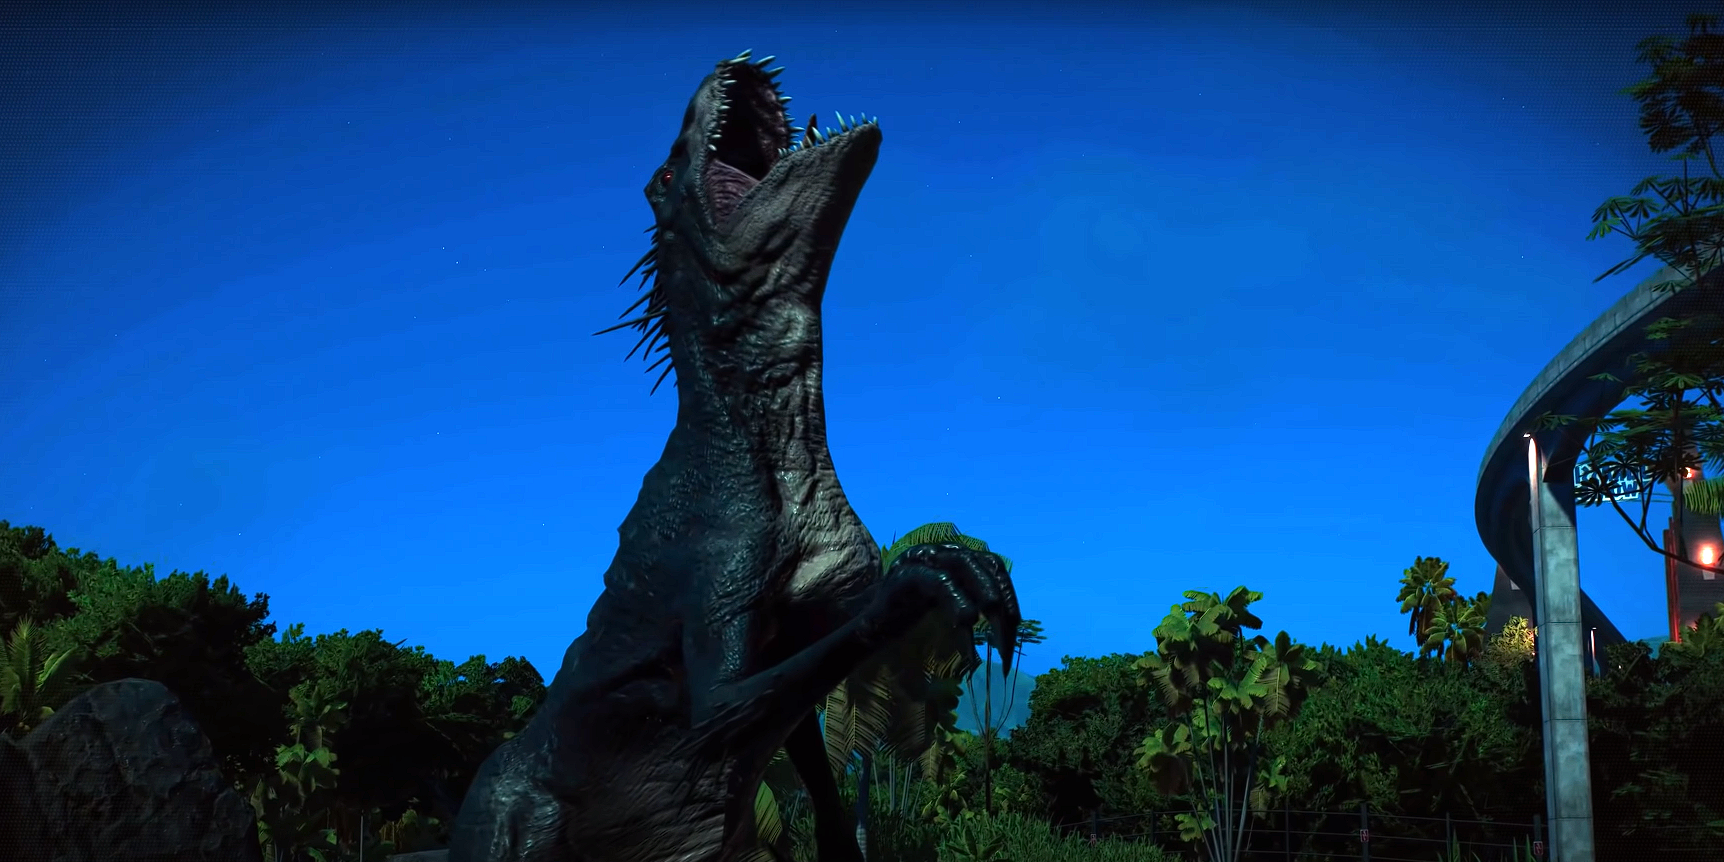 One Of The Best Jurassic Park Game Series Is Returning Sooner Than You Think